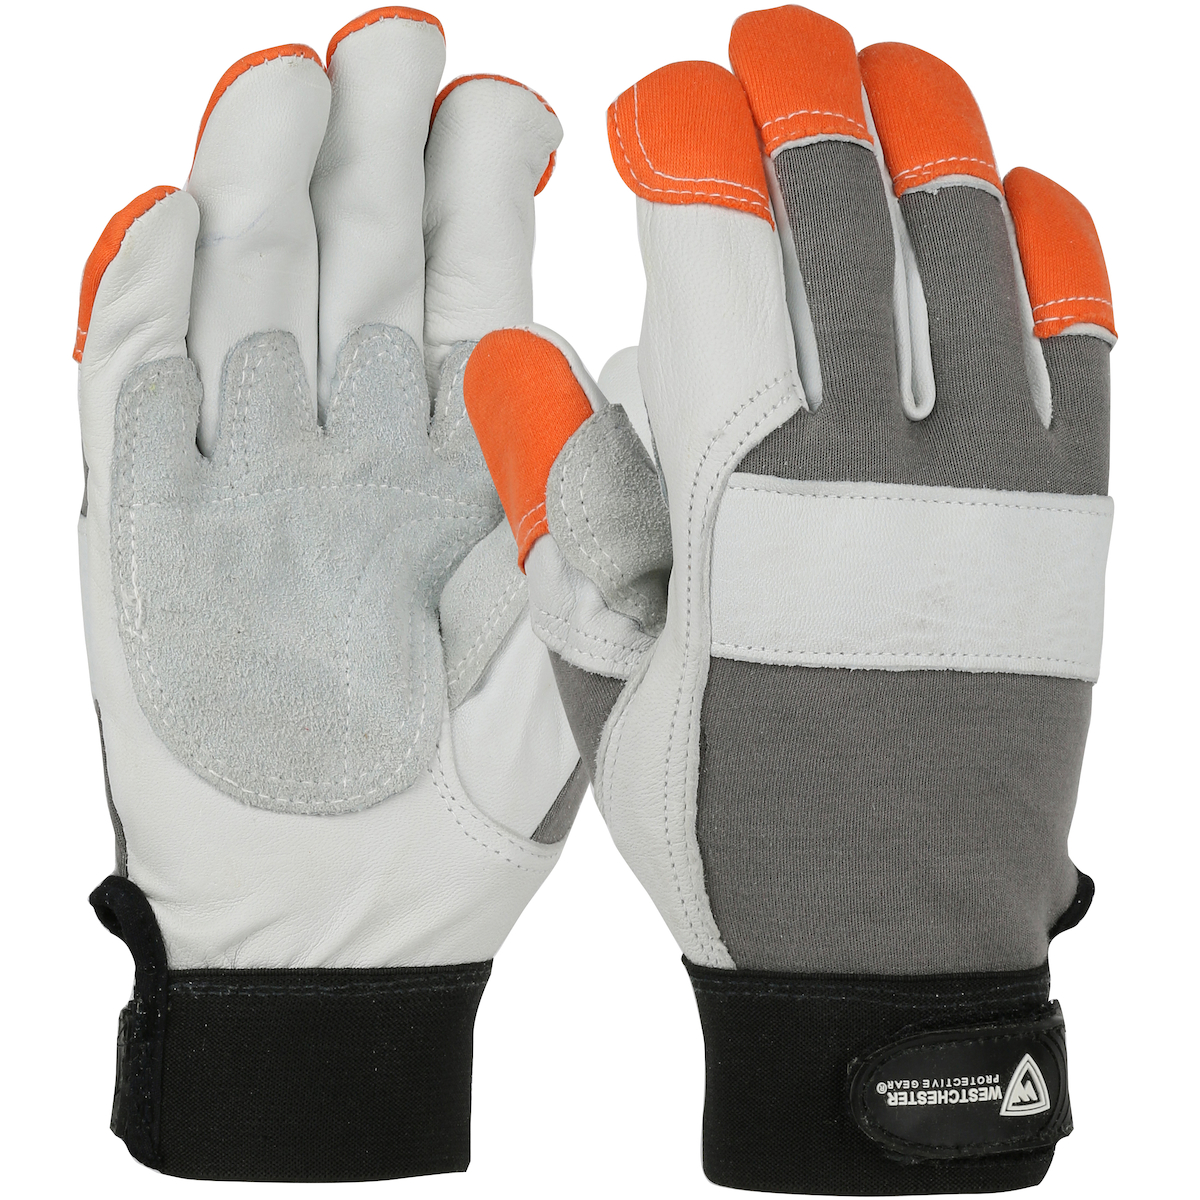 Slip on Cuff Large West Chester Protective Gear Extreme Work 88200 MultiPurpX Gloves Safety Performance Gloves w/XTouch Index Finger Thumb Saddle Synthetic Leather Palm 